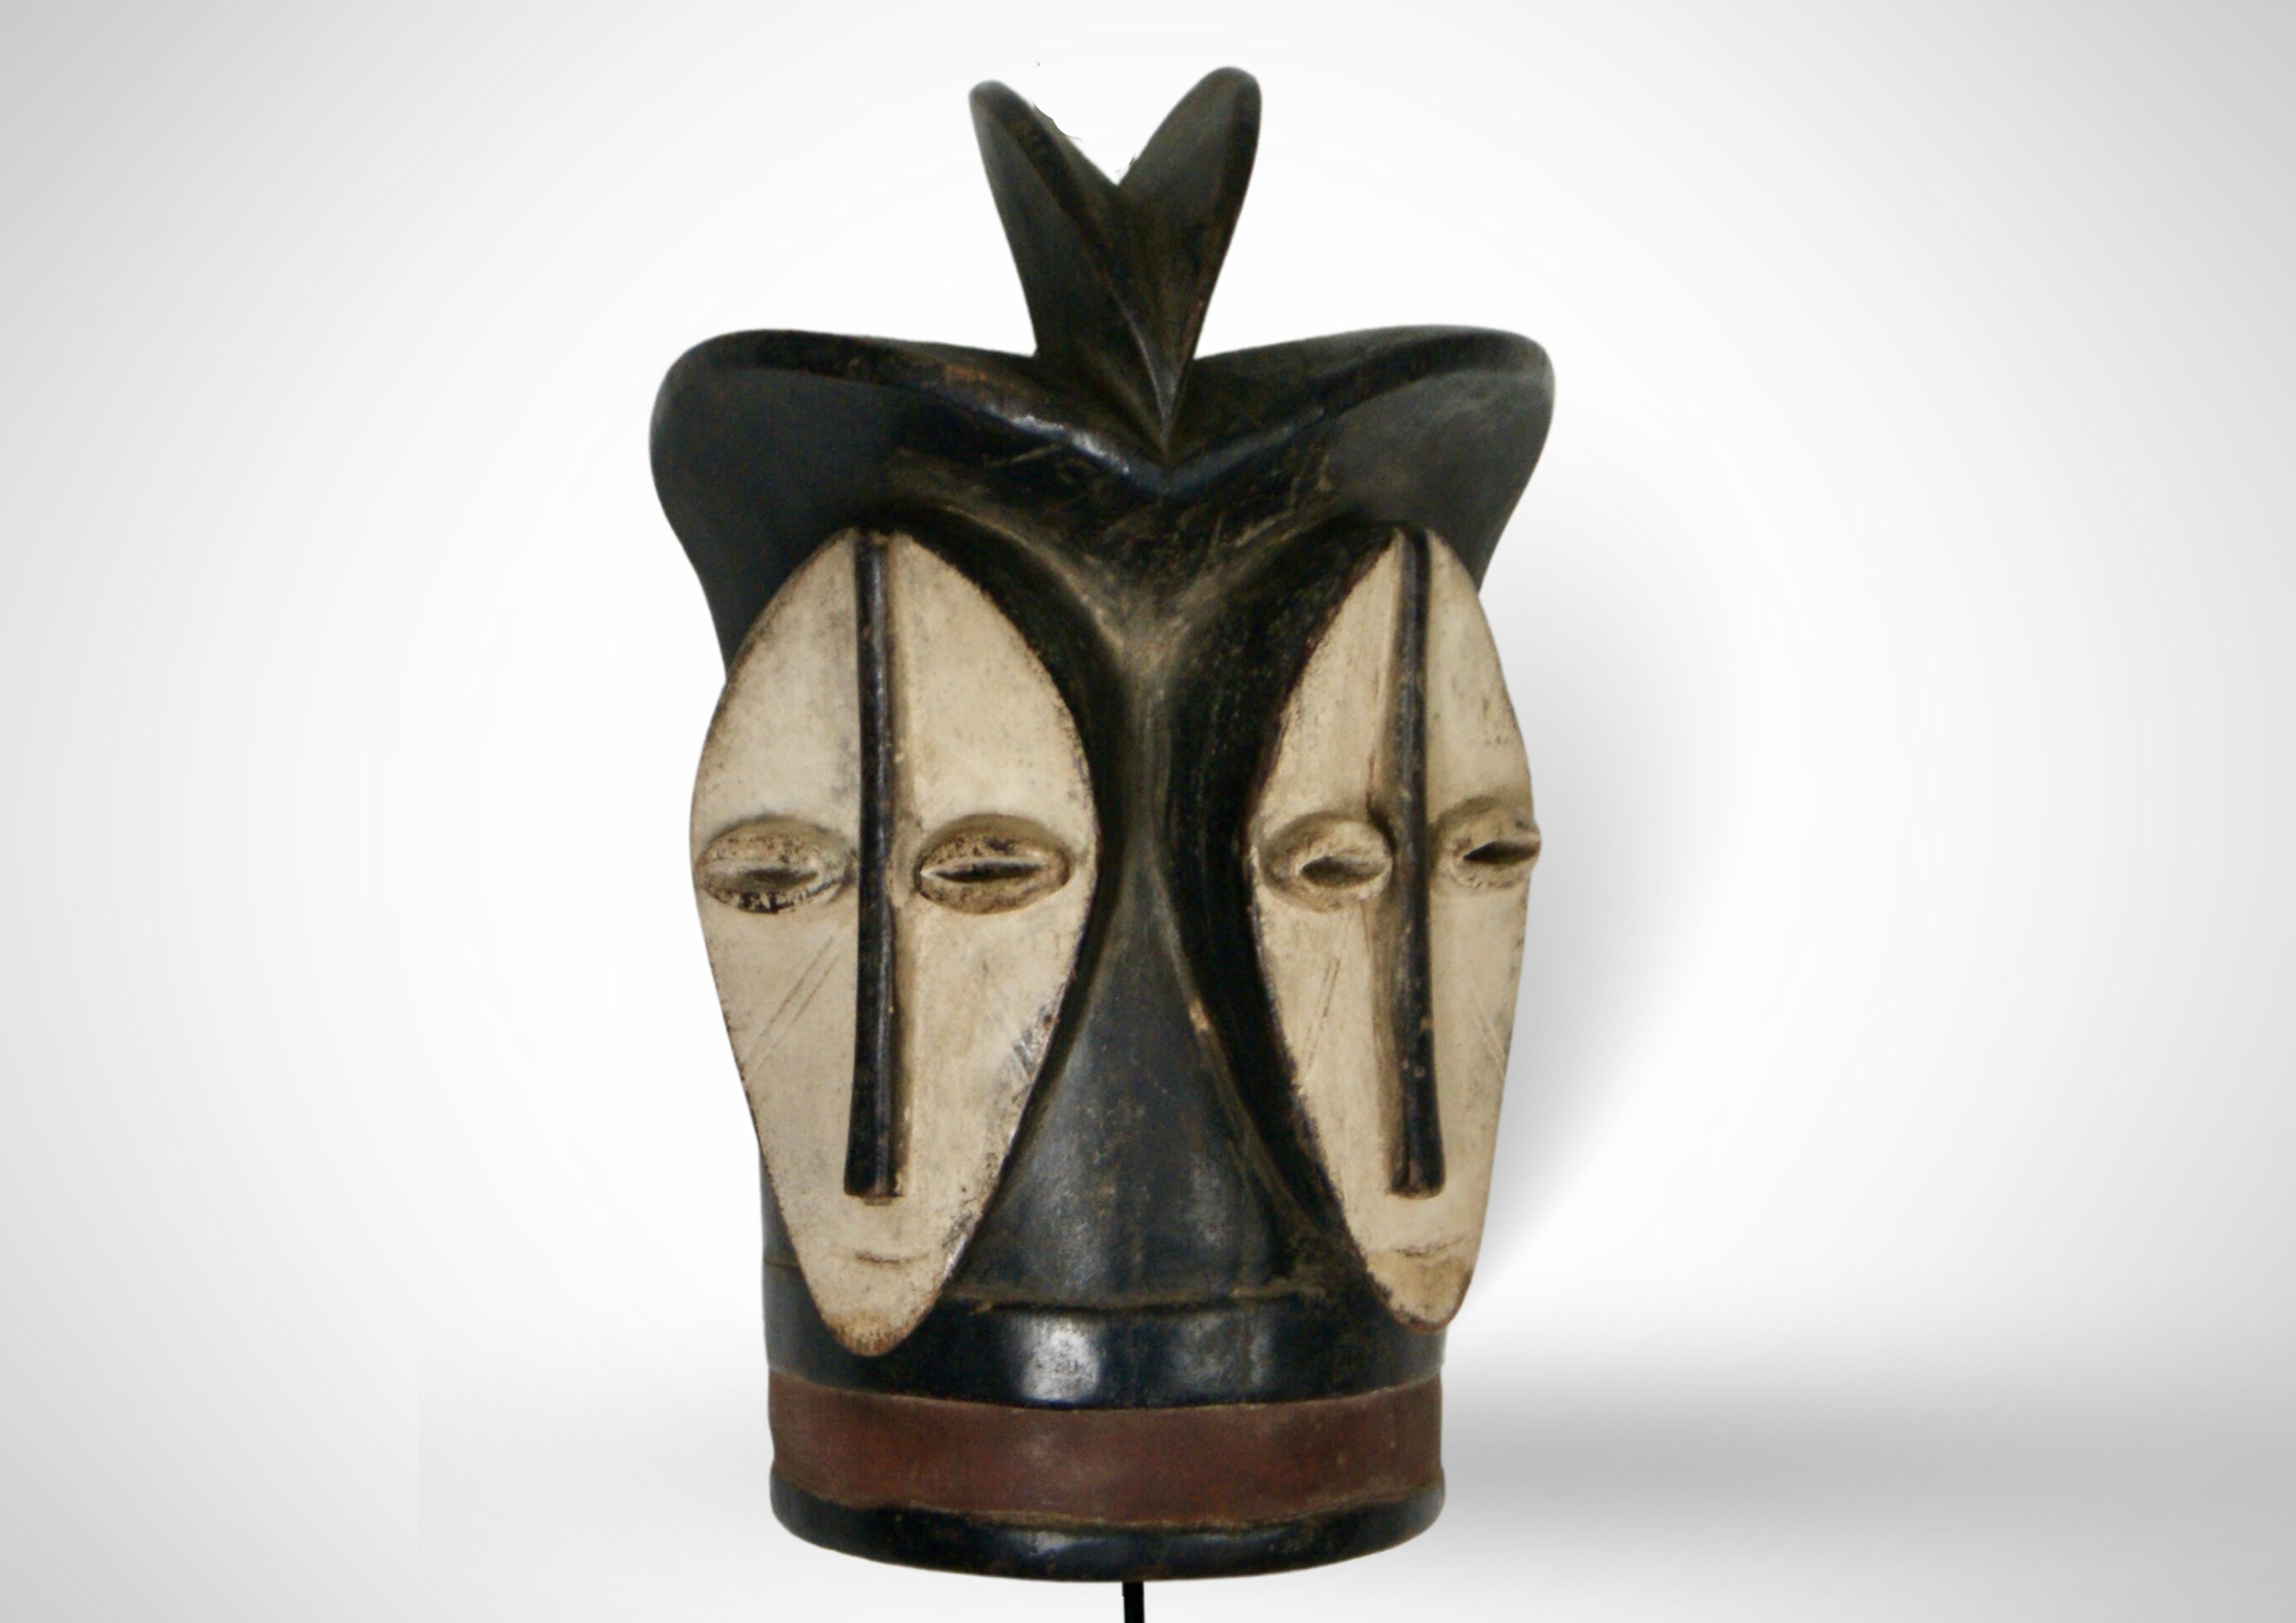 20th Century Rare 2 Faced Twin Lega Mask DRC Large Sized For Sale